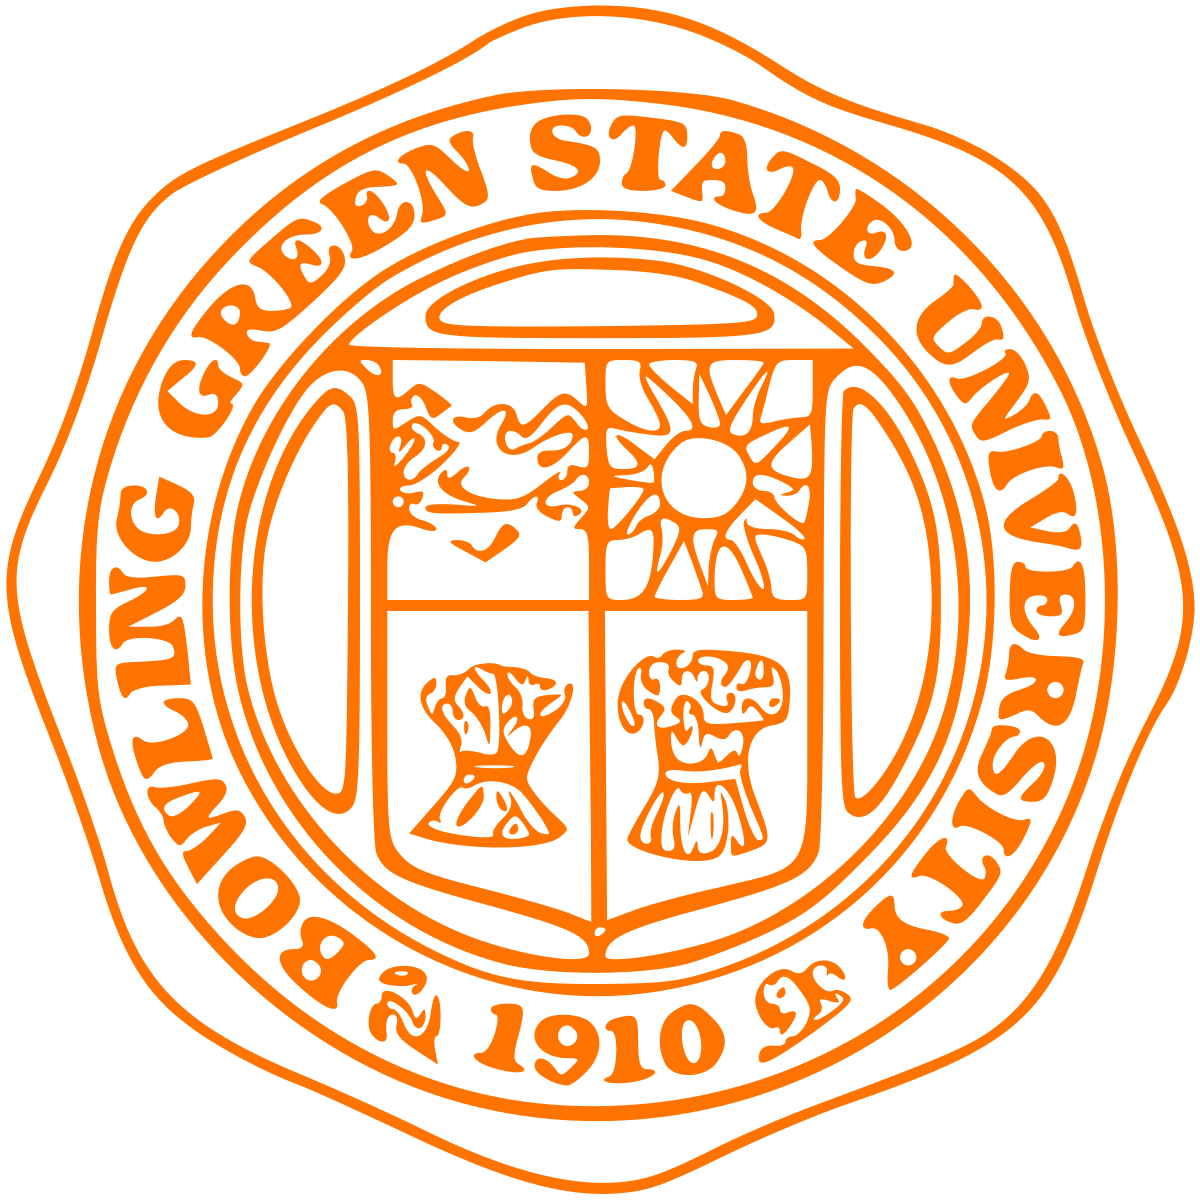 Bowling_Green_State_University_seal.svg.png